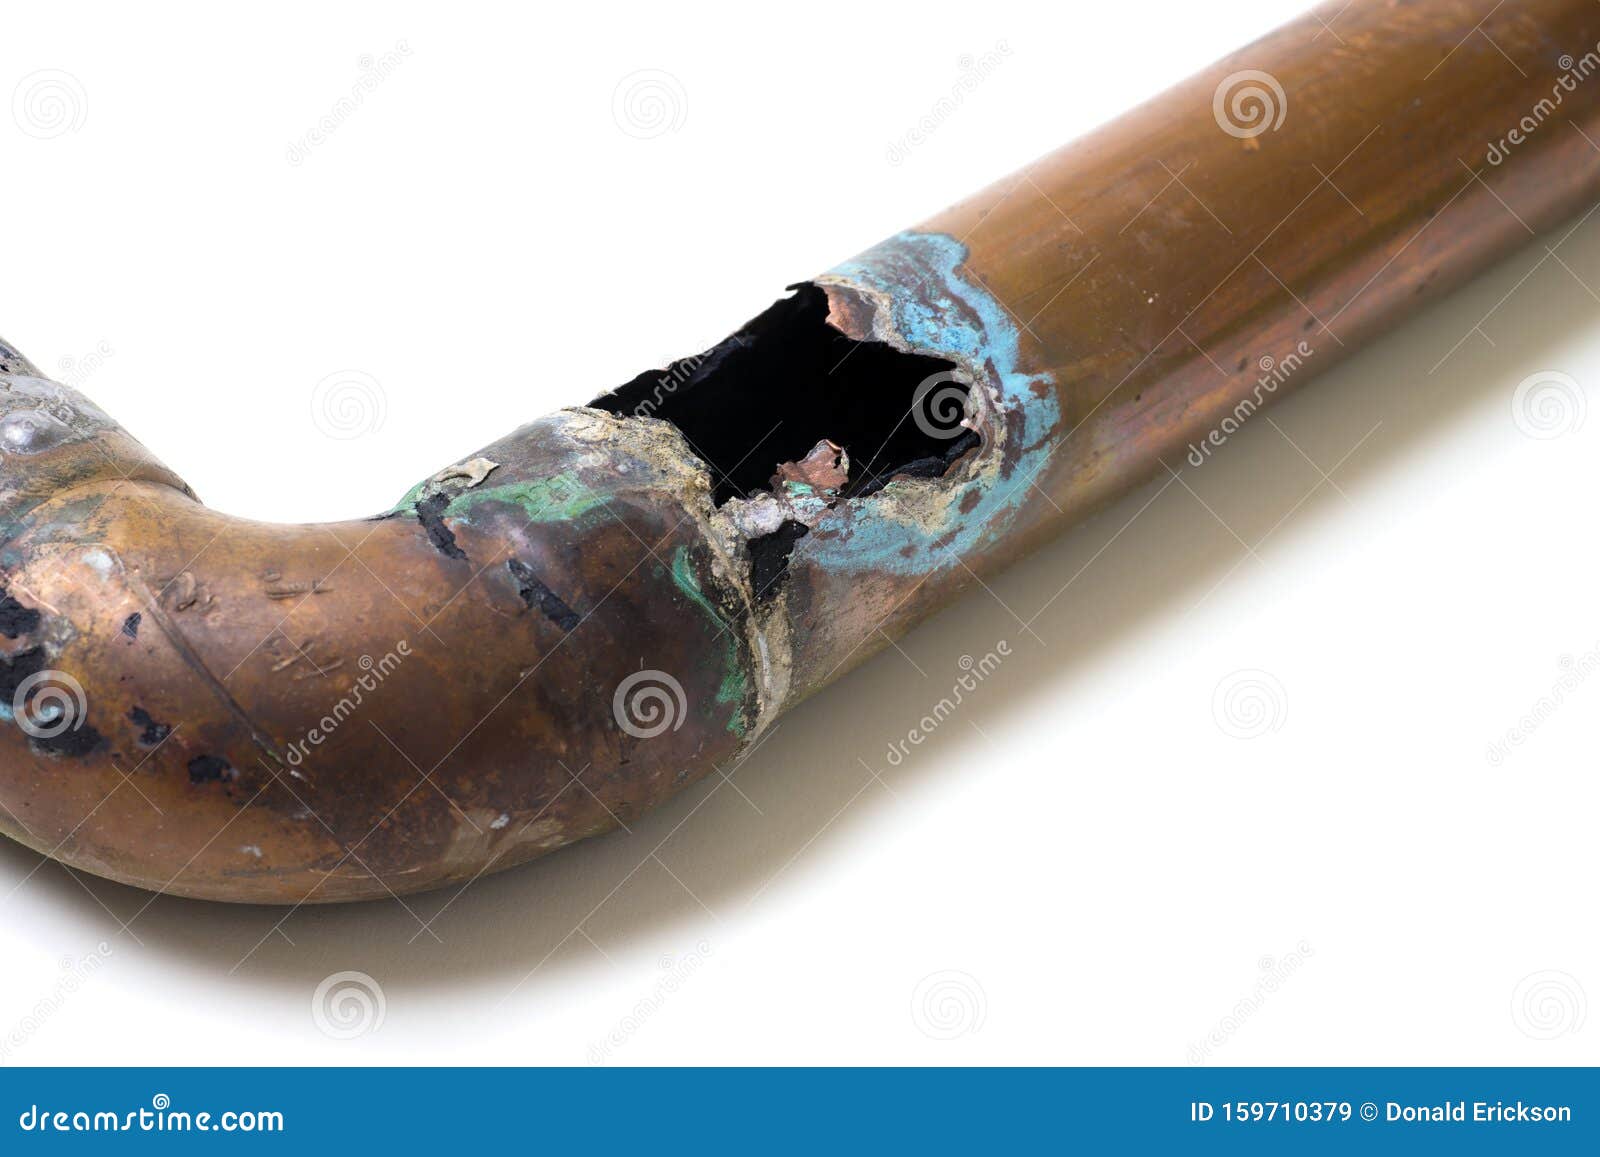 Plumbing Corroded Damaged Water Line Isolated On White Stock Image Image Of People